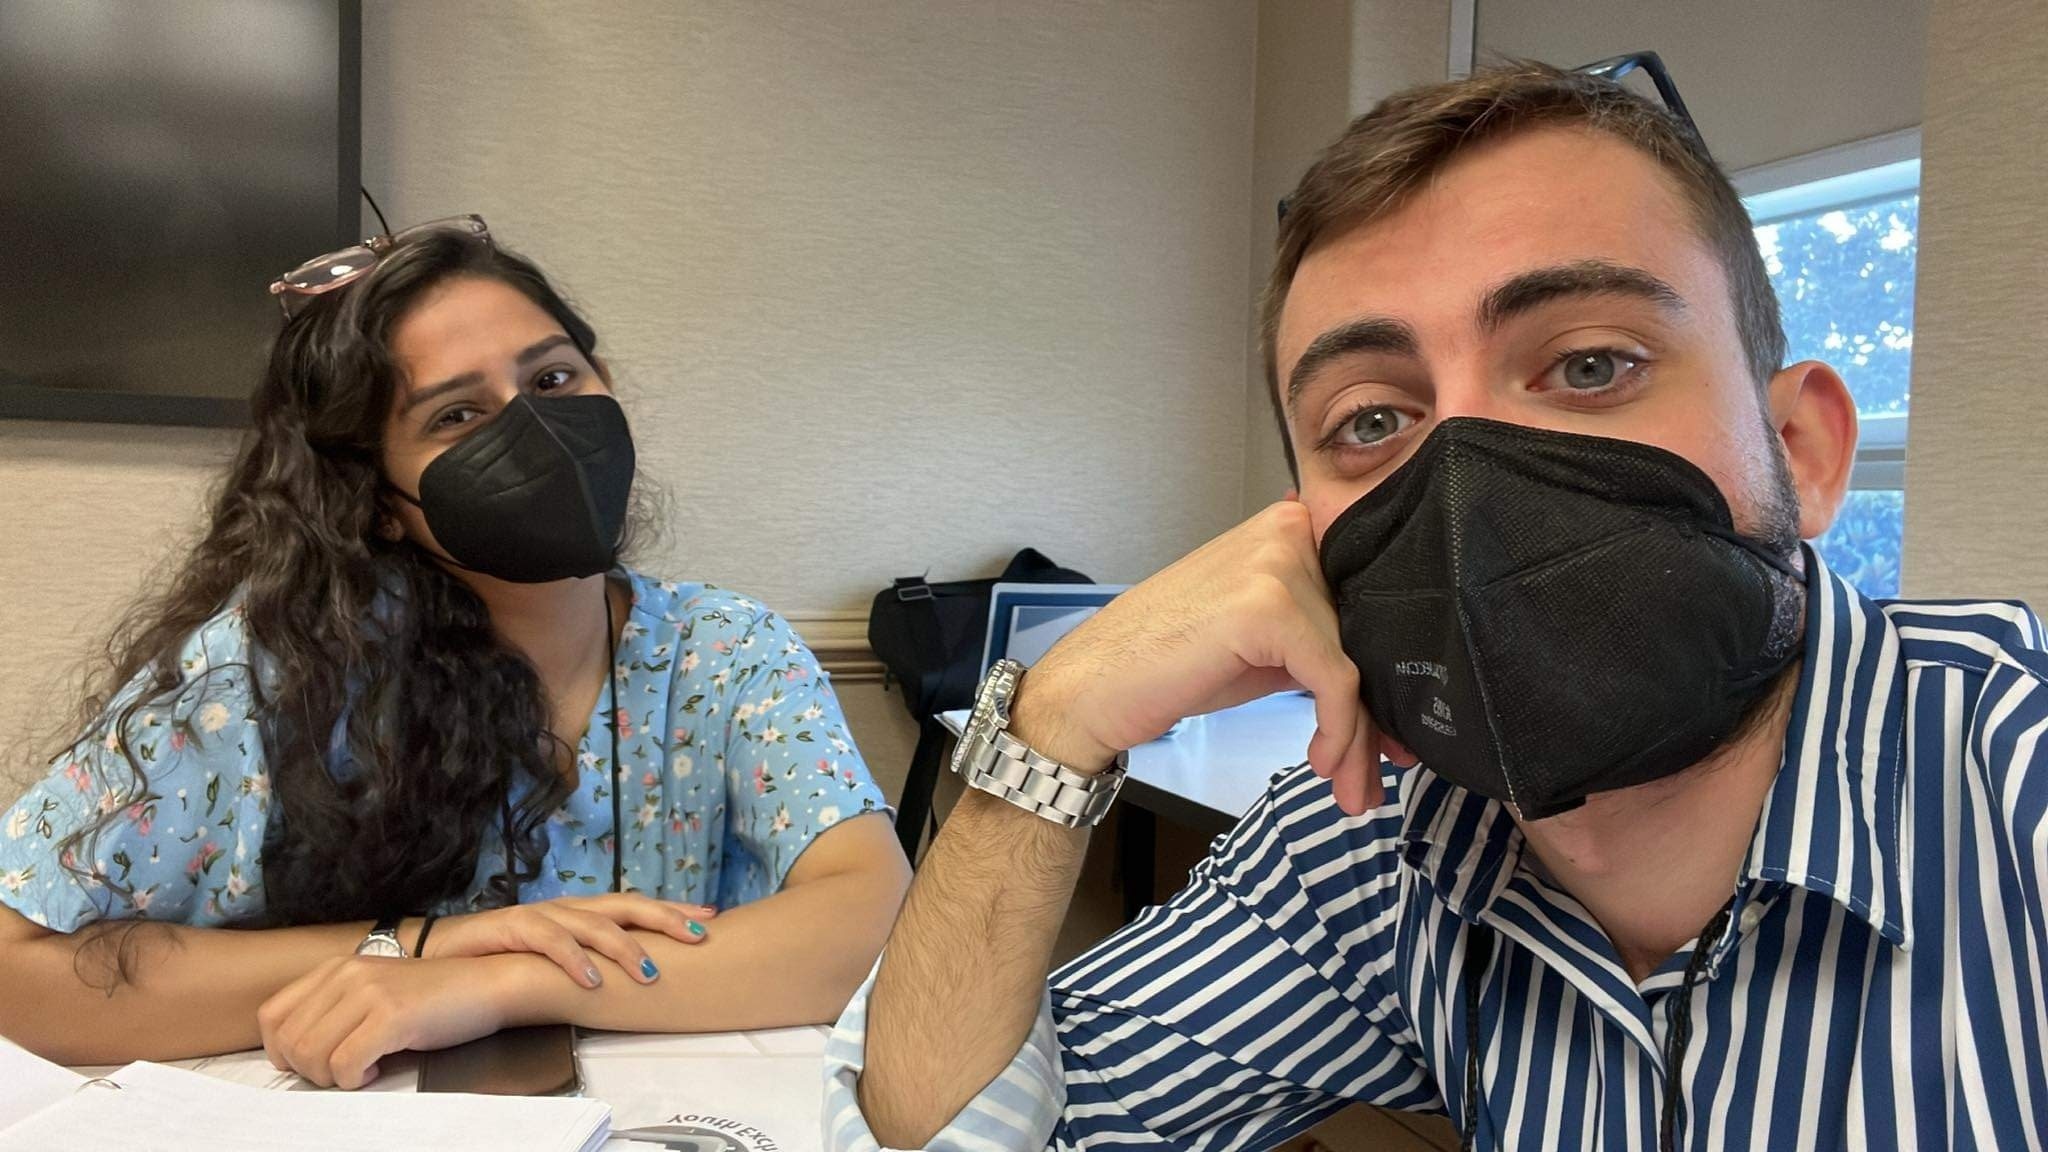 Qurat and Zaid wearing masks in a classroom and taking a selfie together. 